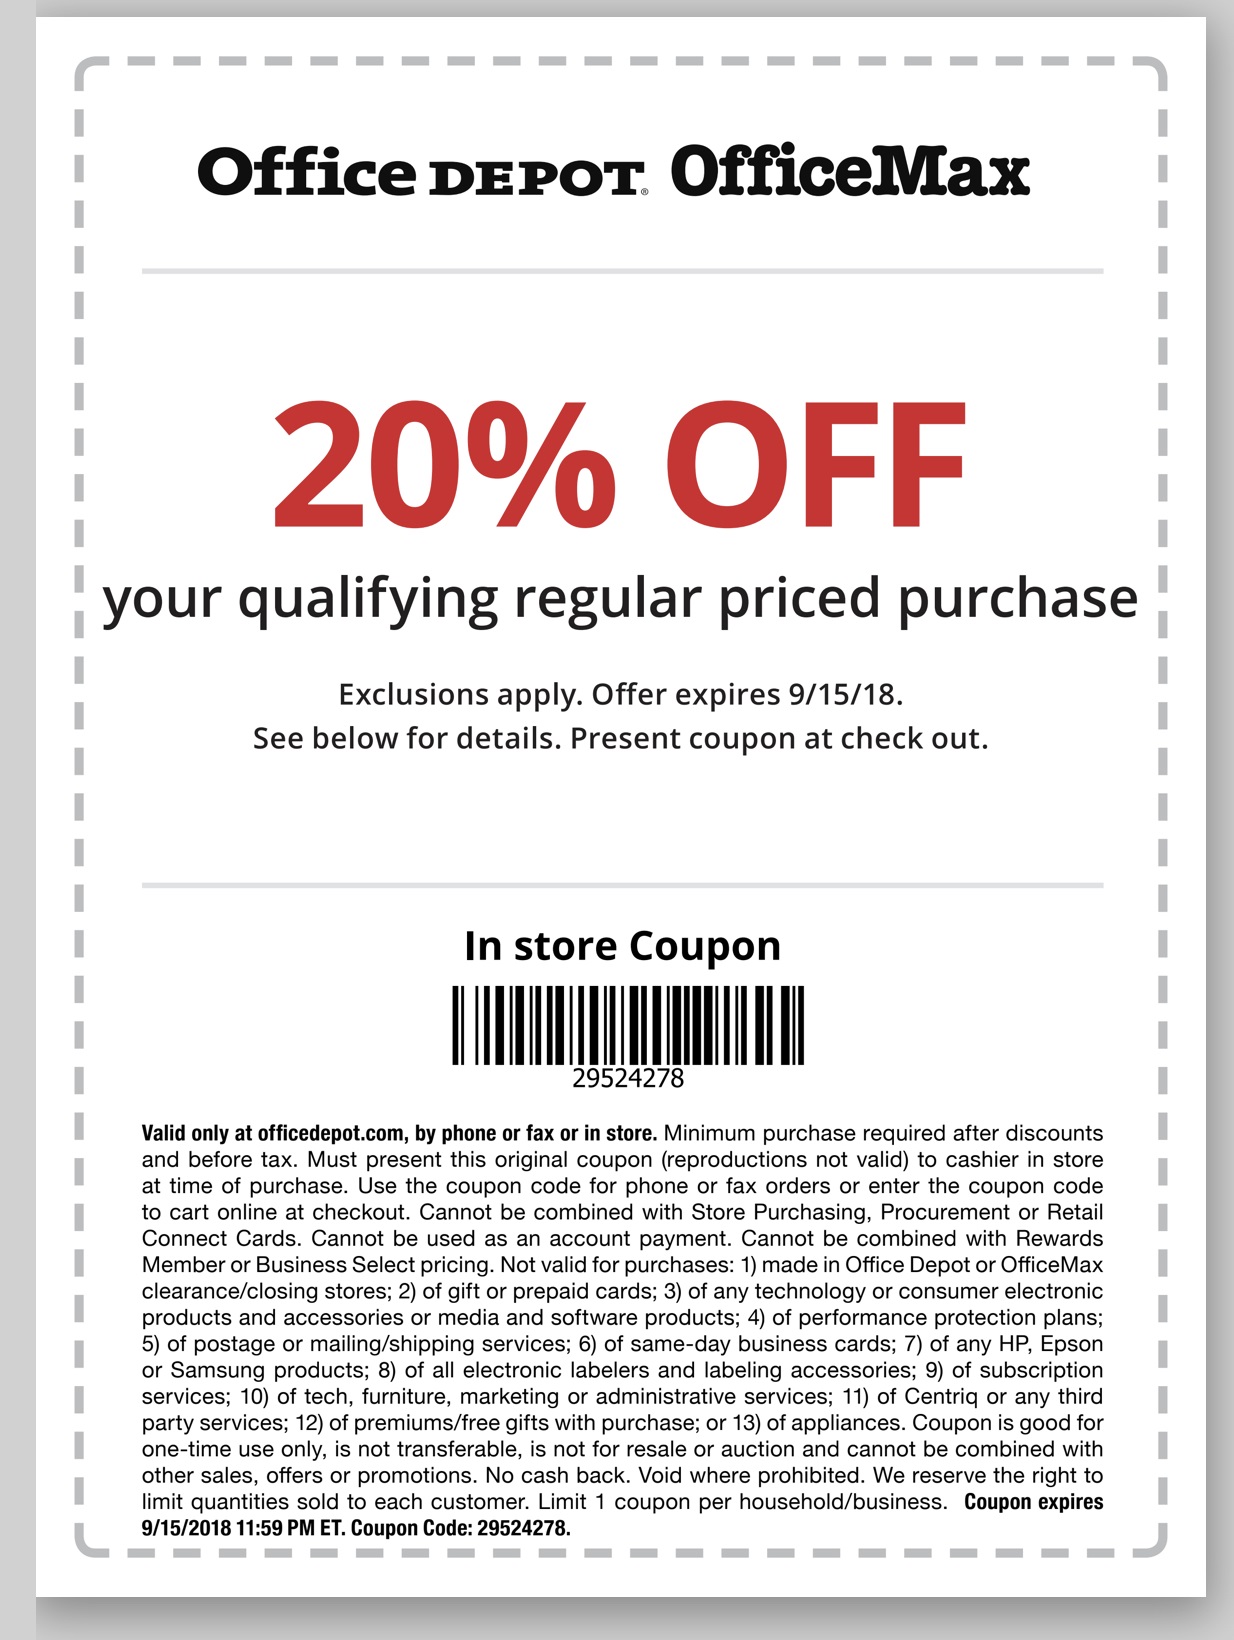 Creatice Office Depot Coupon Code For Printers for Living room